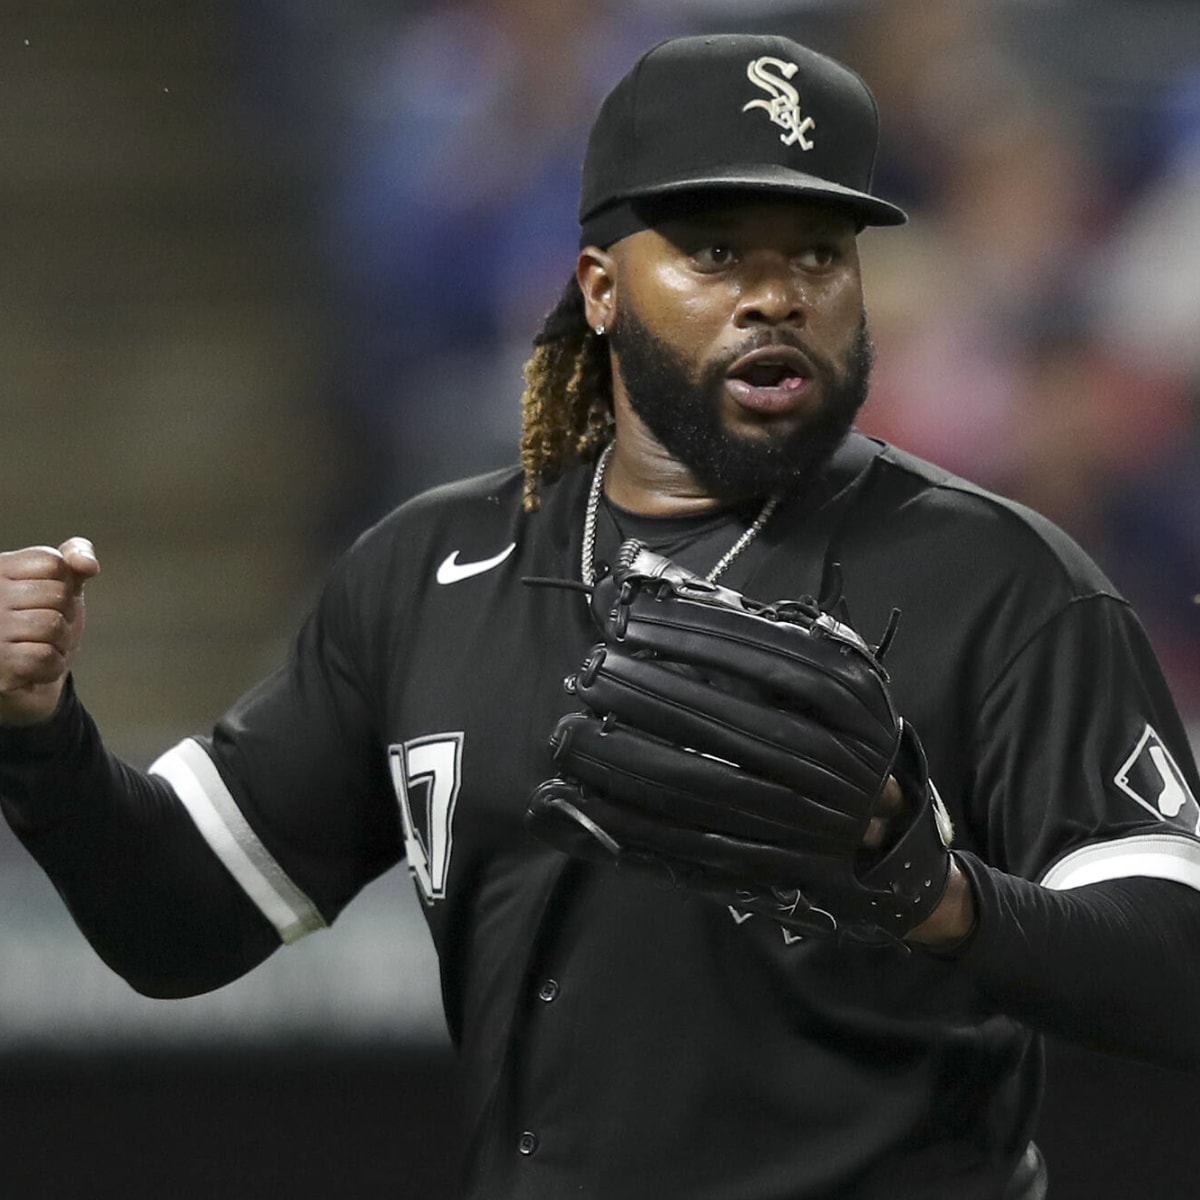 Marlins Season Preview: Johnny Cueto can shimmy his way to more